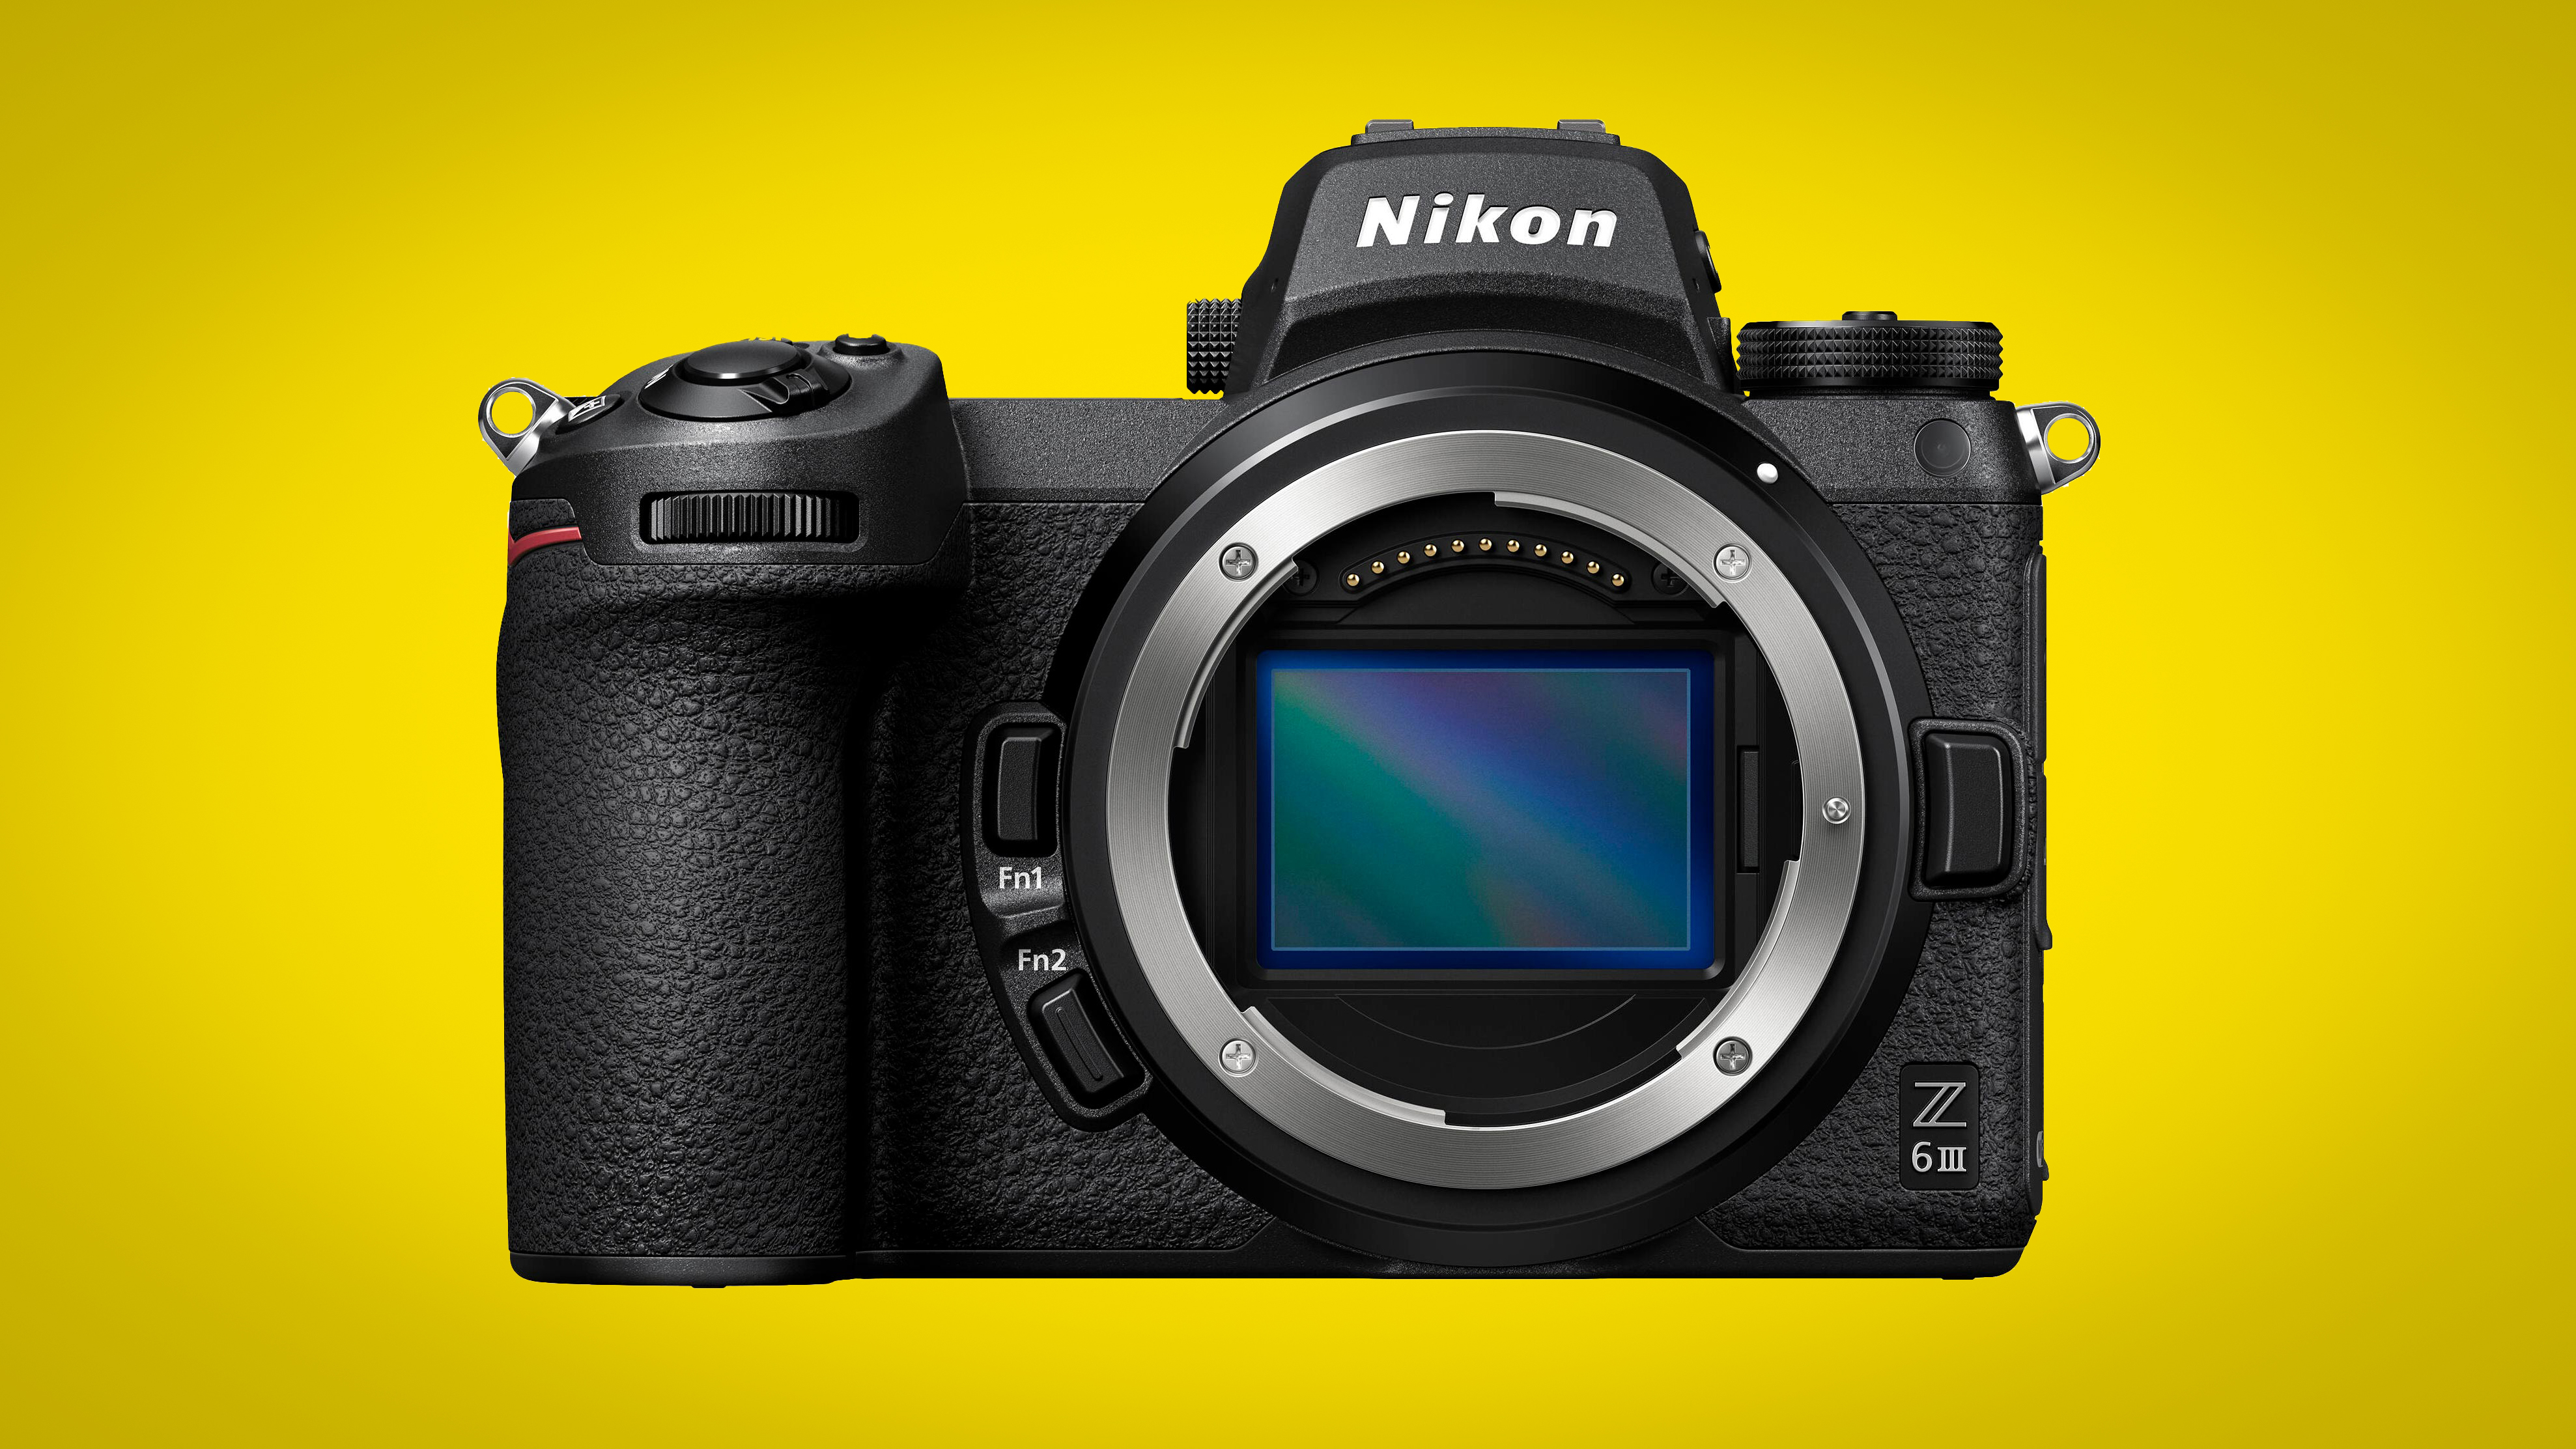 Nikon Z6 III: this is what I think we'll get | Digital Camera World